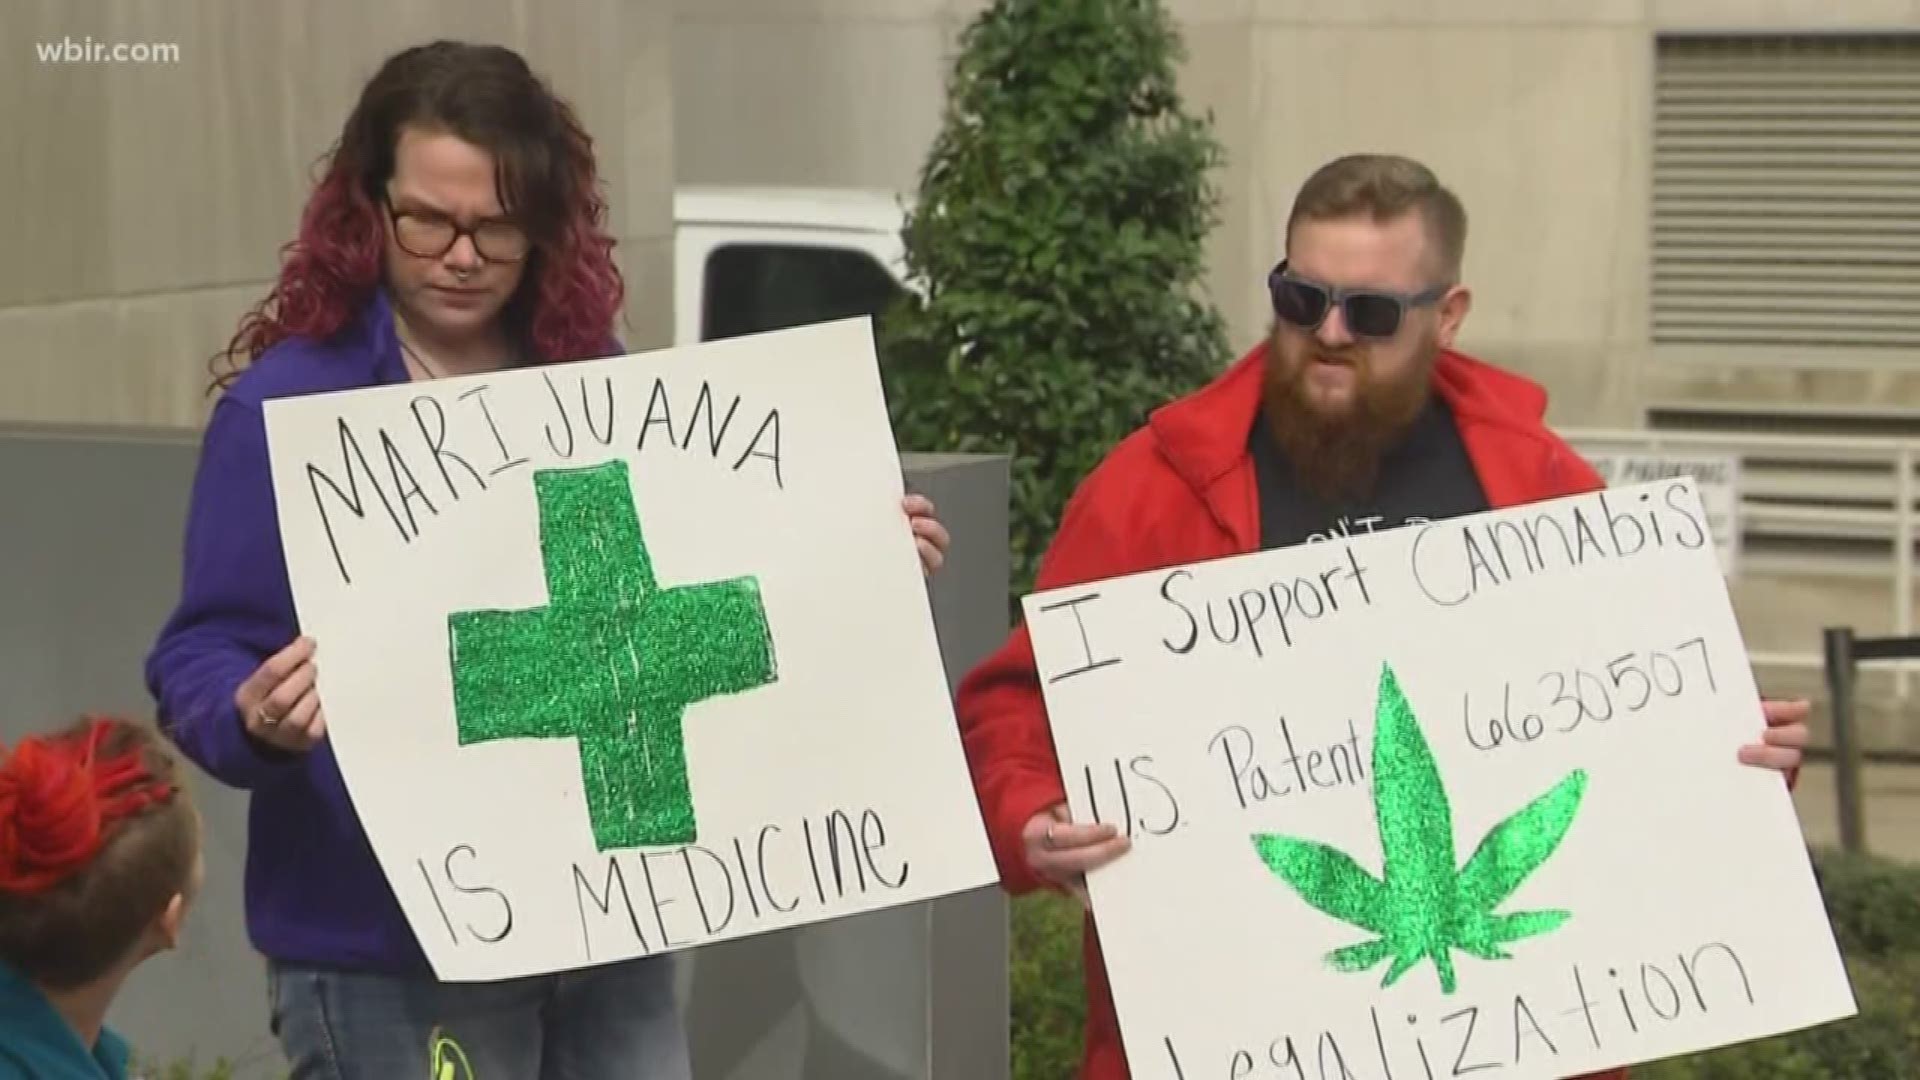 A group pushing for lawmakers to legalize marijuana rallied in Nashville.